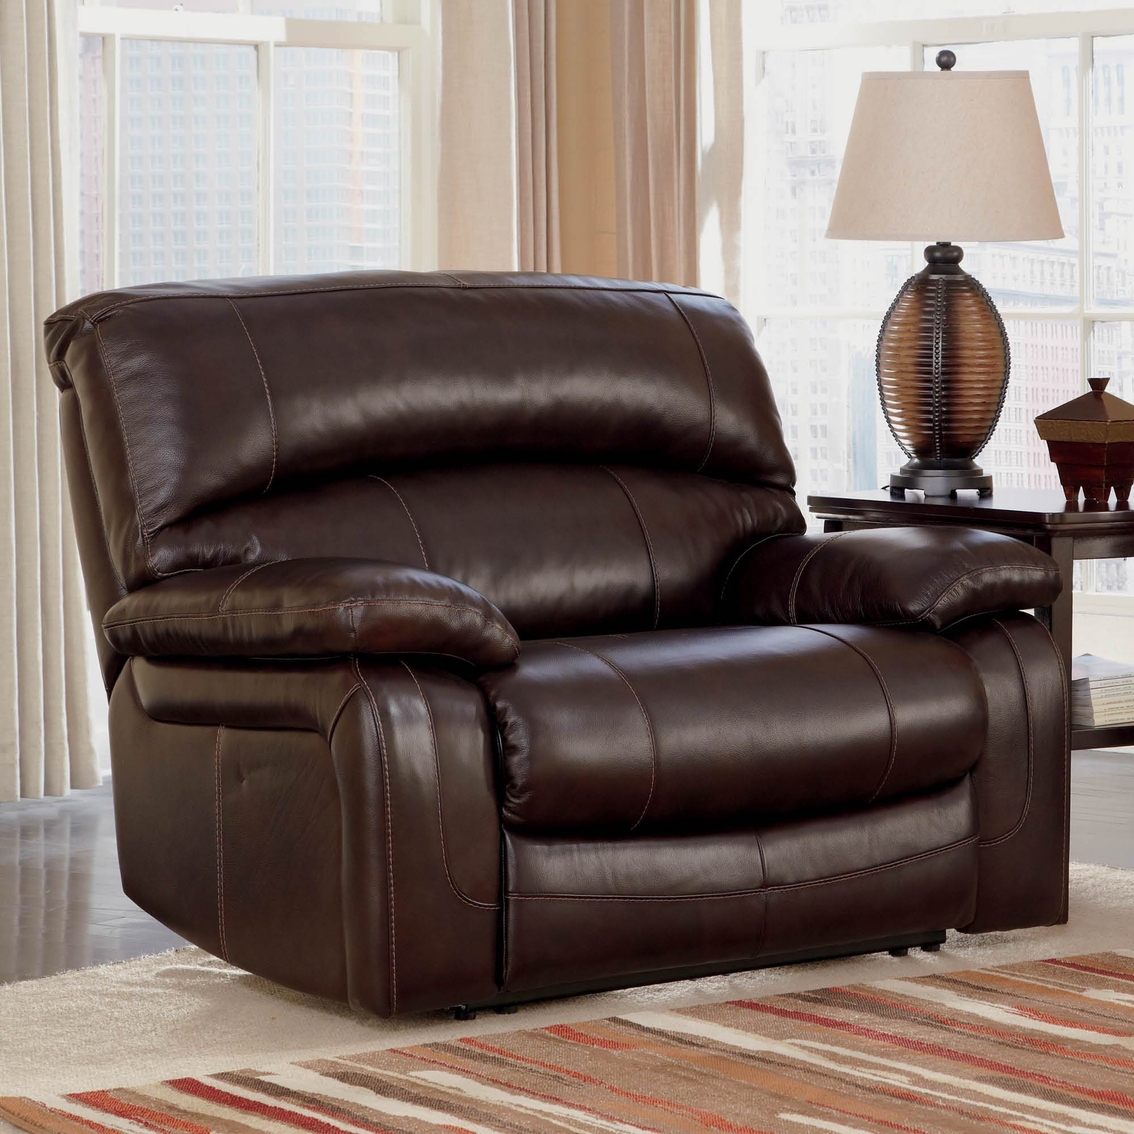 Ashley Damacio Oversized Recliner Chairs And Recliners Furniture